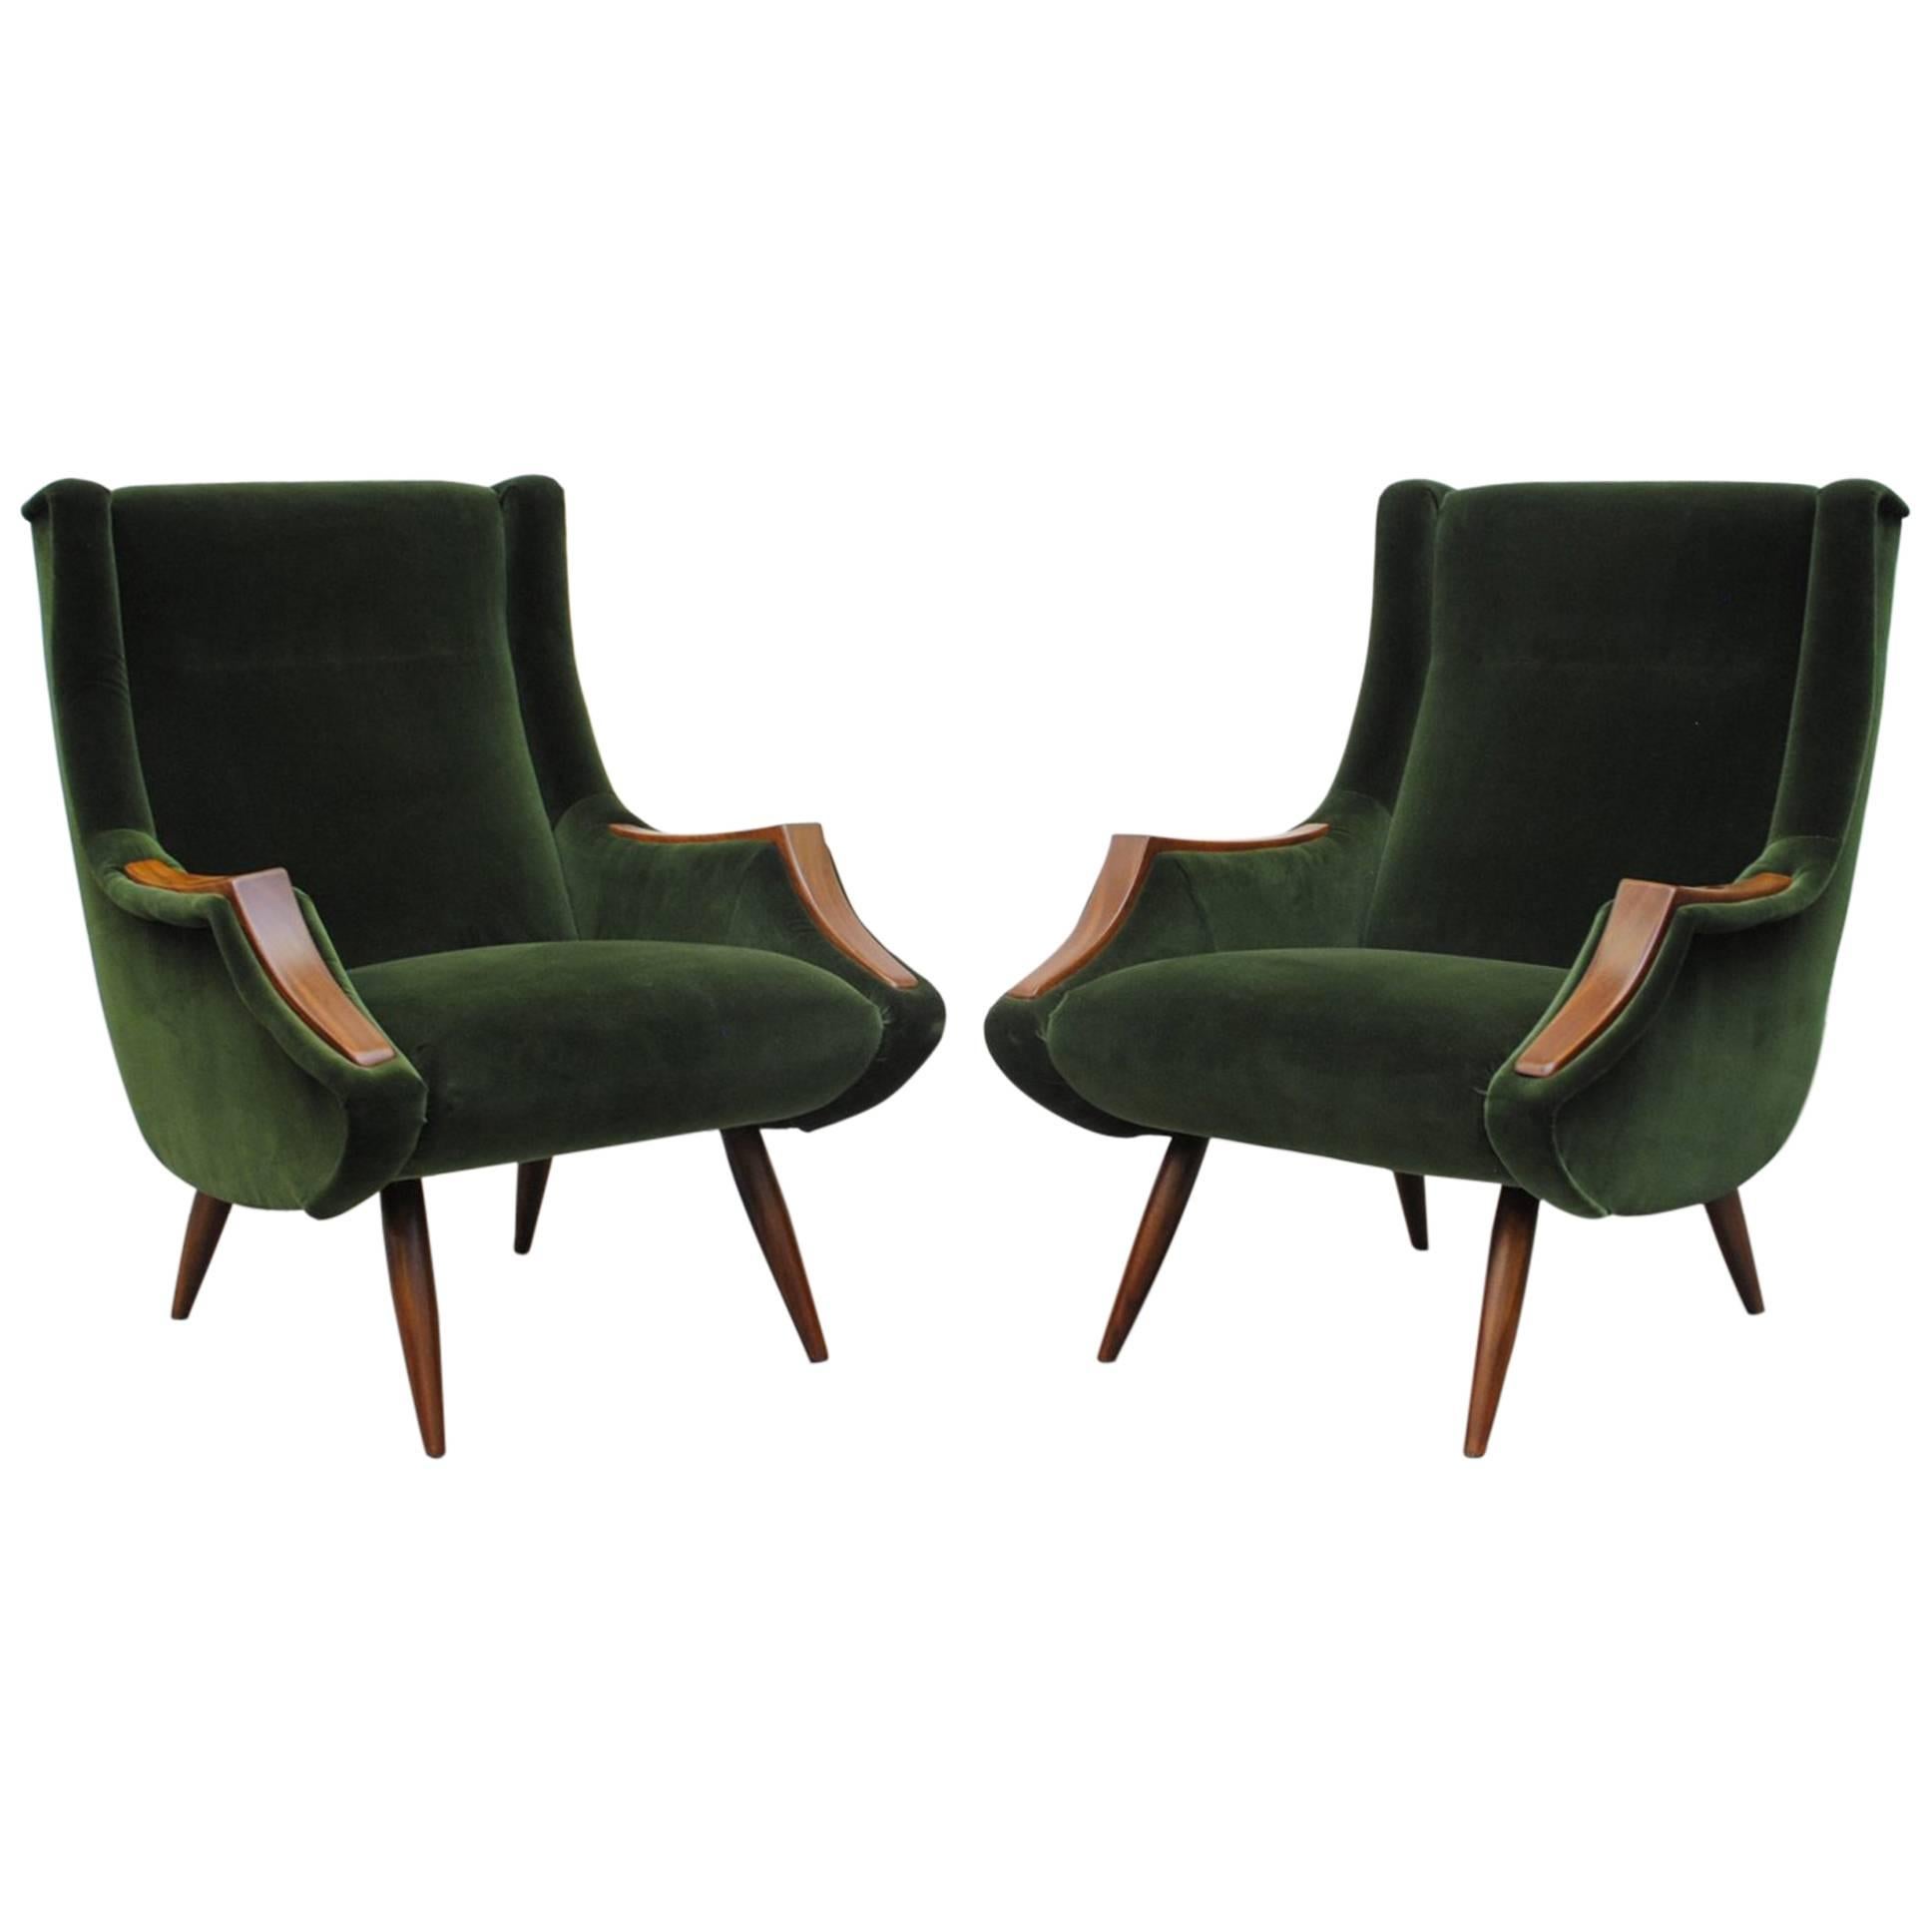 Pair of Emerald Green Marco Zanuso Style Lounge Chairs